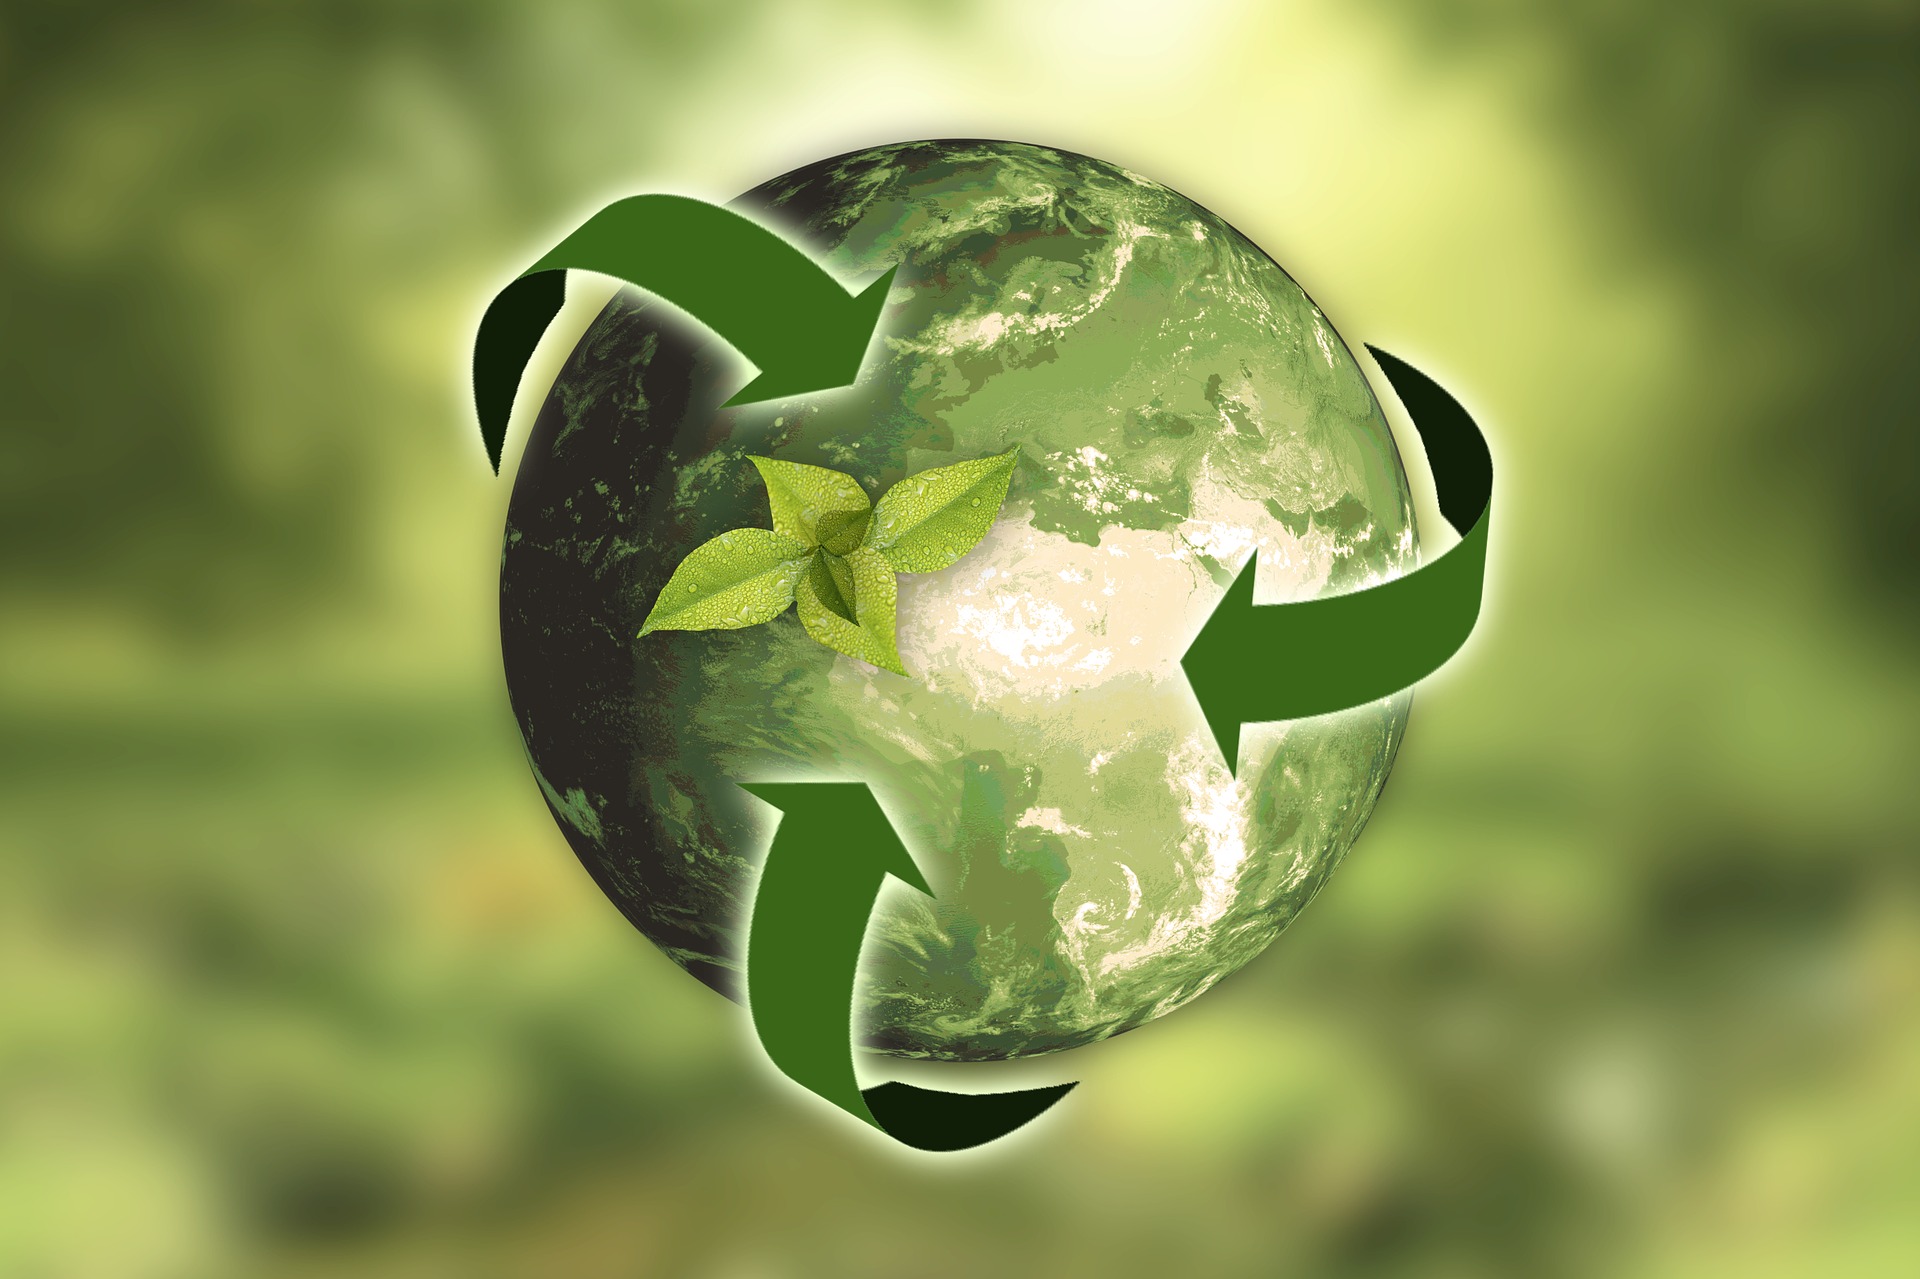 Unlock a greener future for your organization—click here to request our recycling services today!